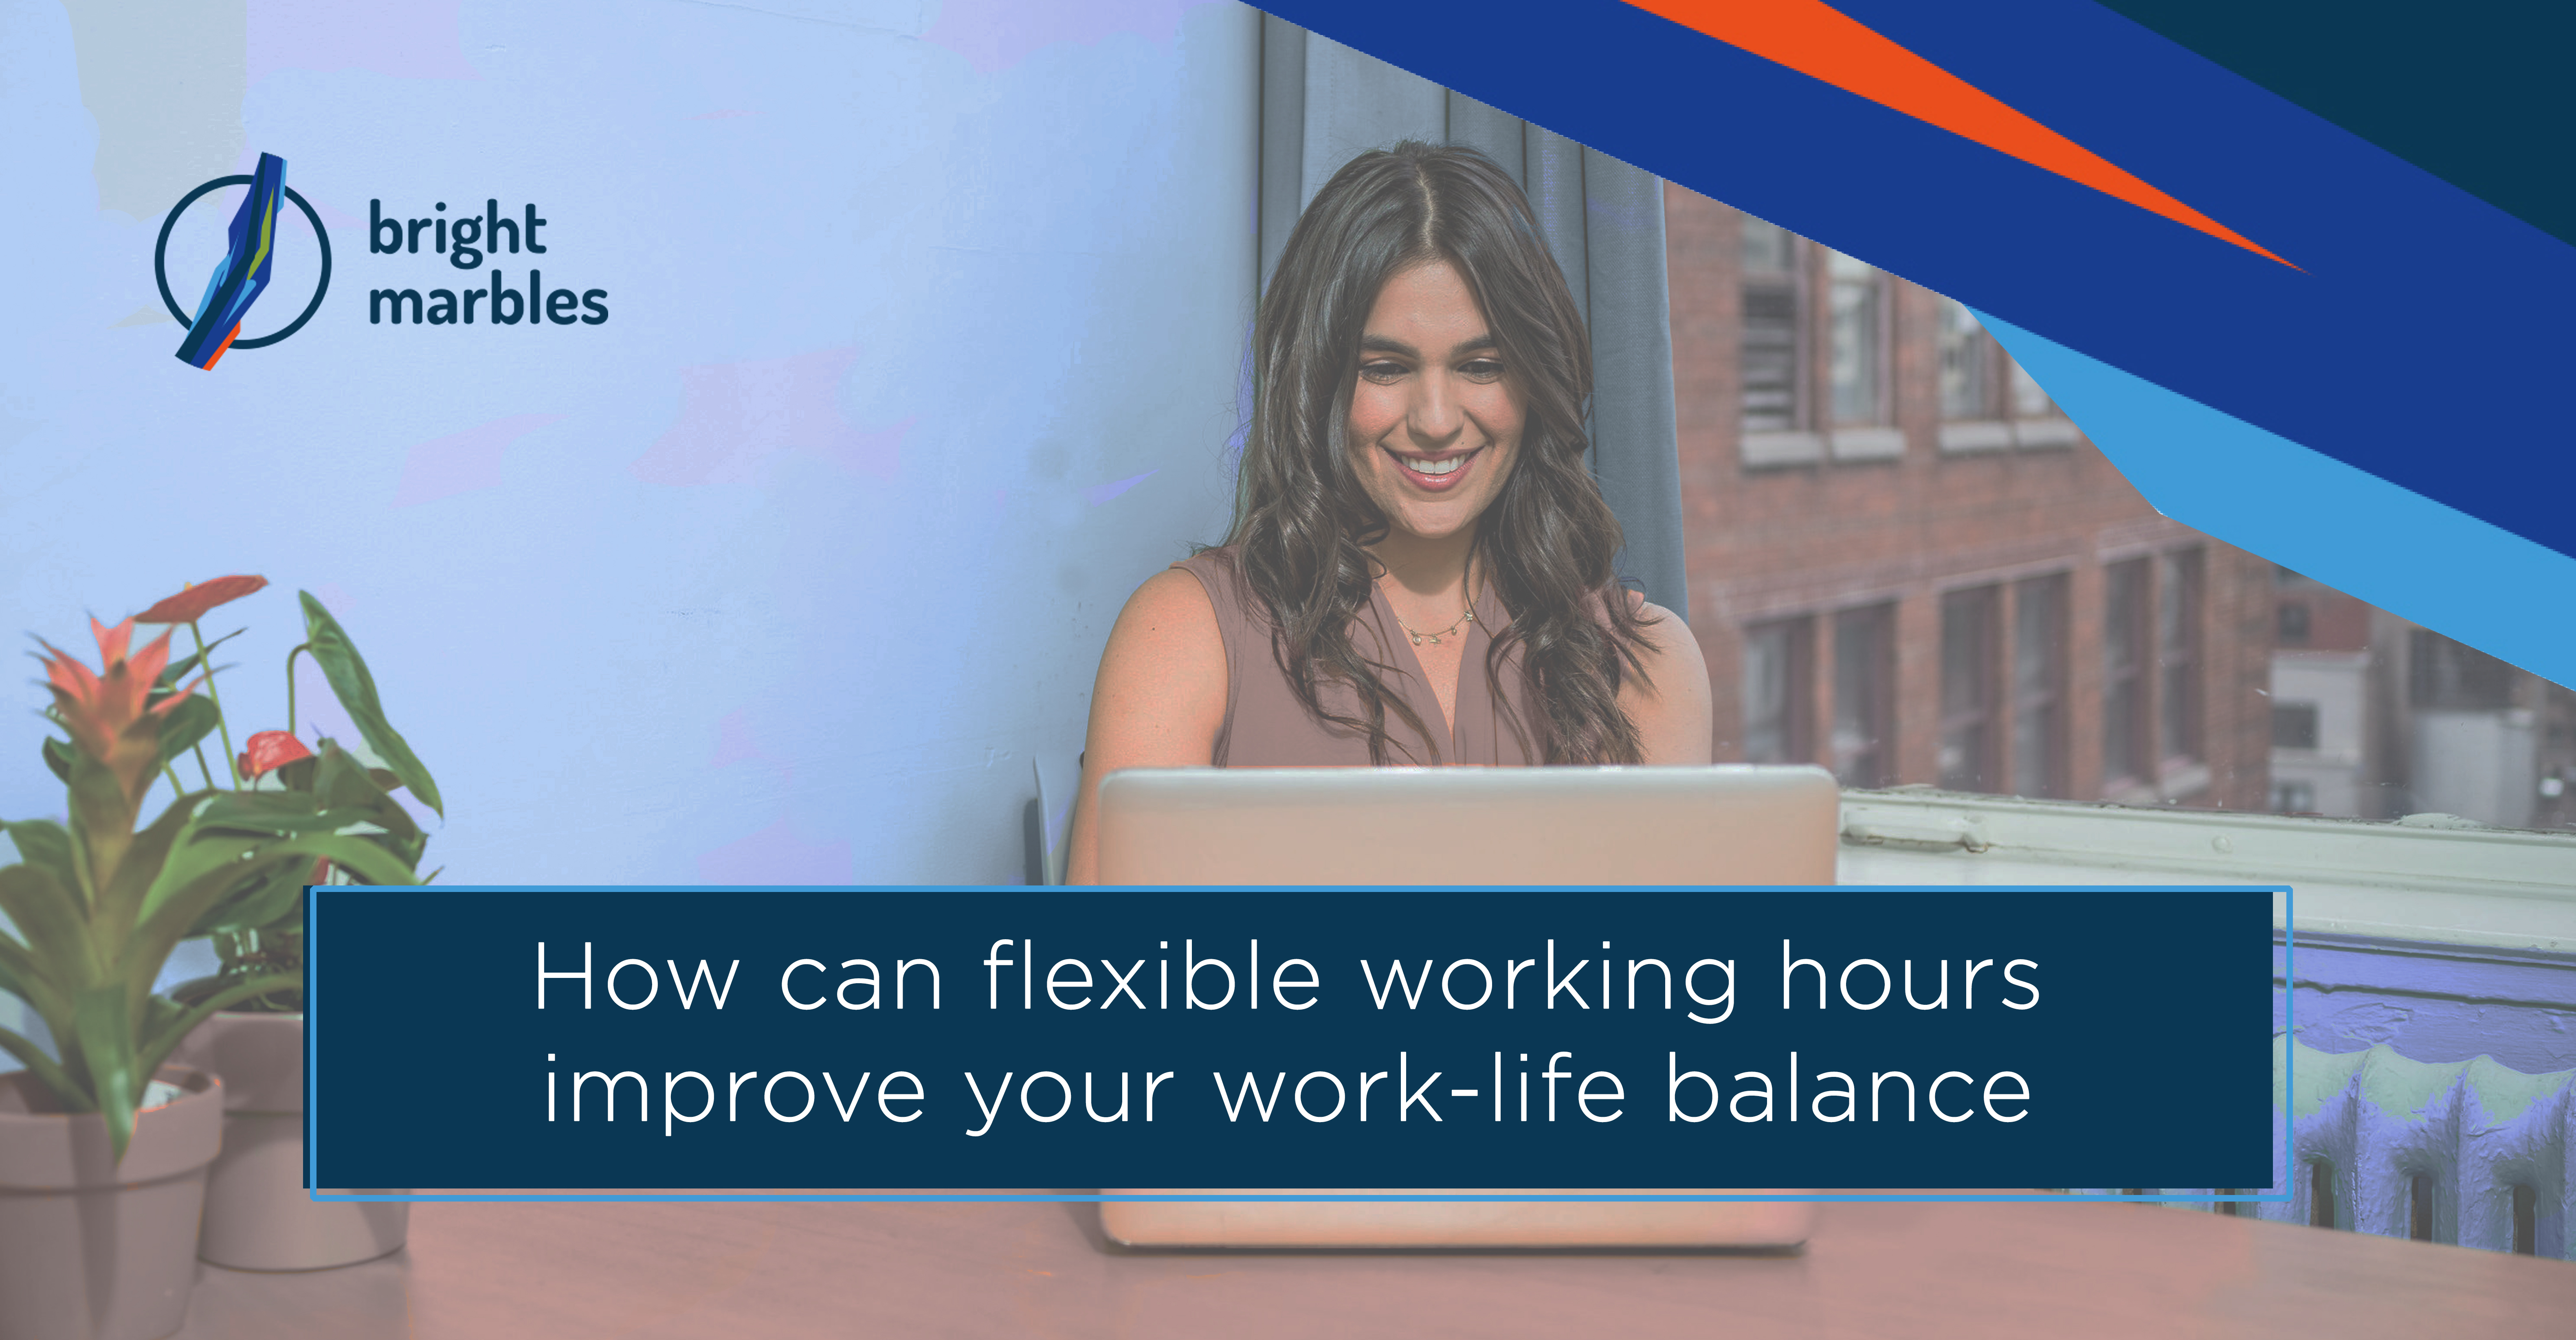 How can flexible working hours improve your work-life balance